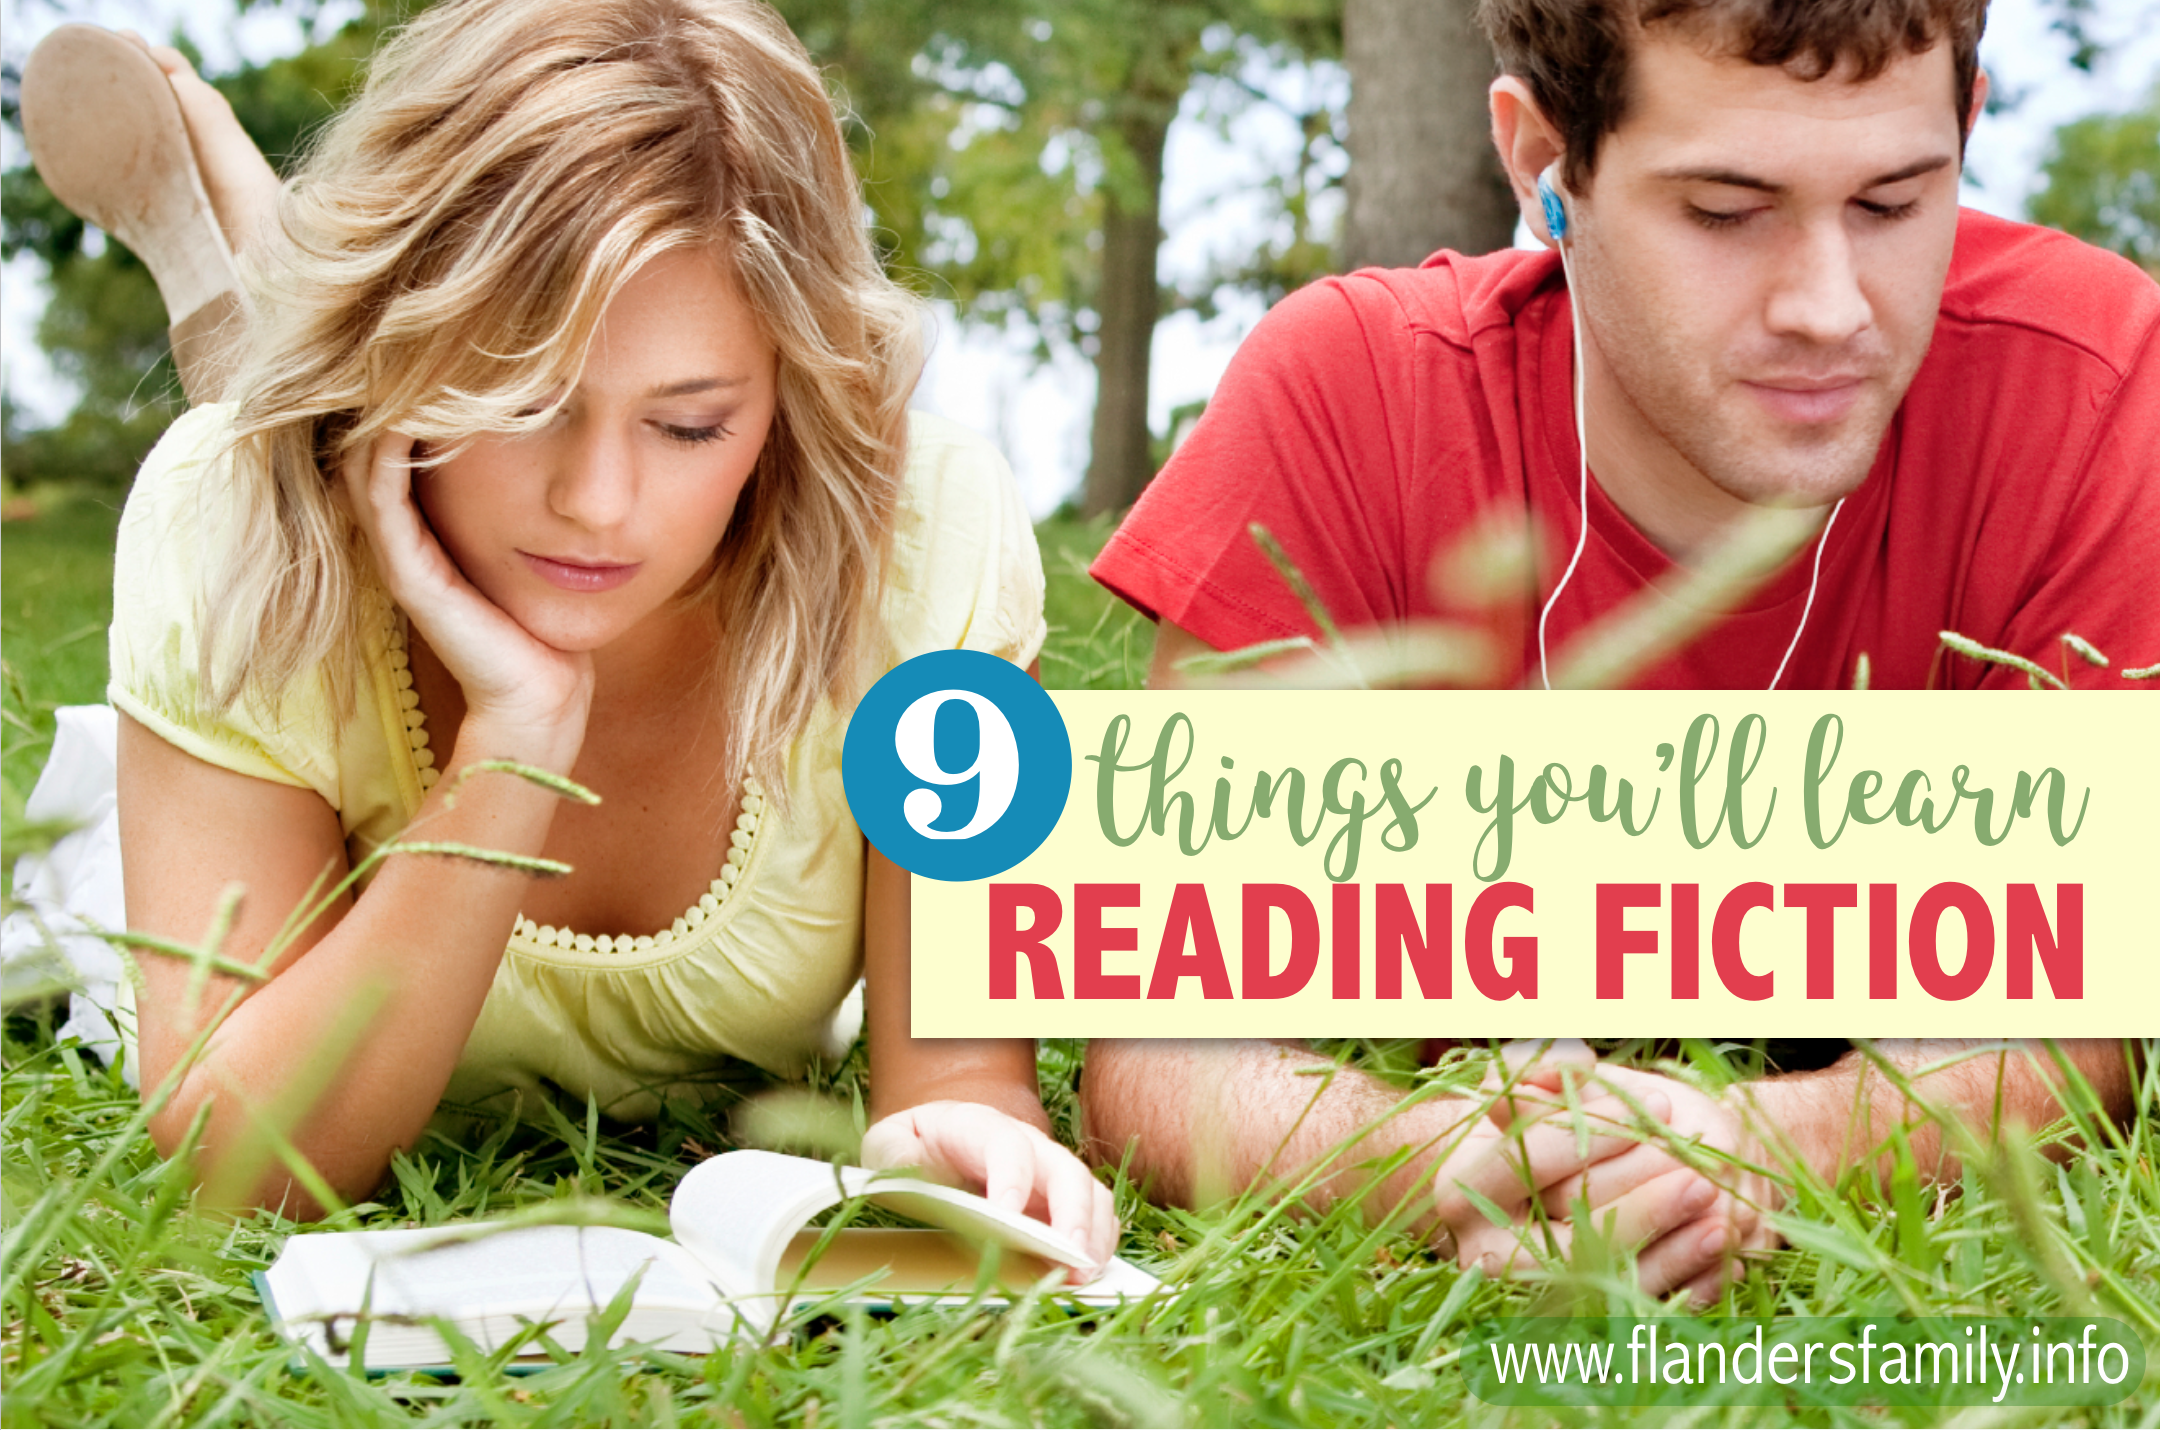 9 Benefits of Reading Fiction